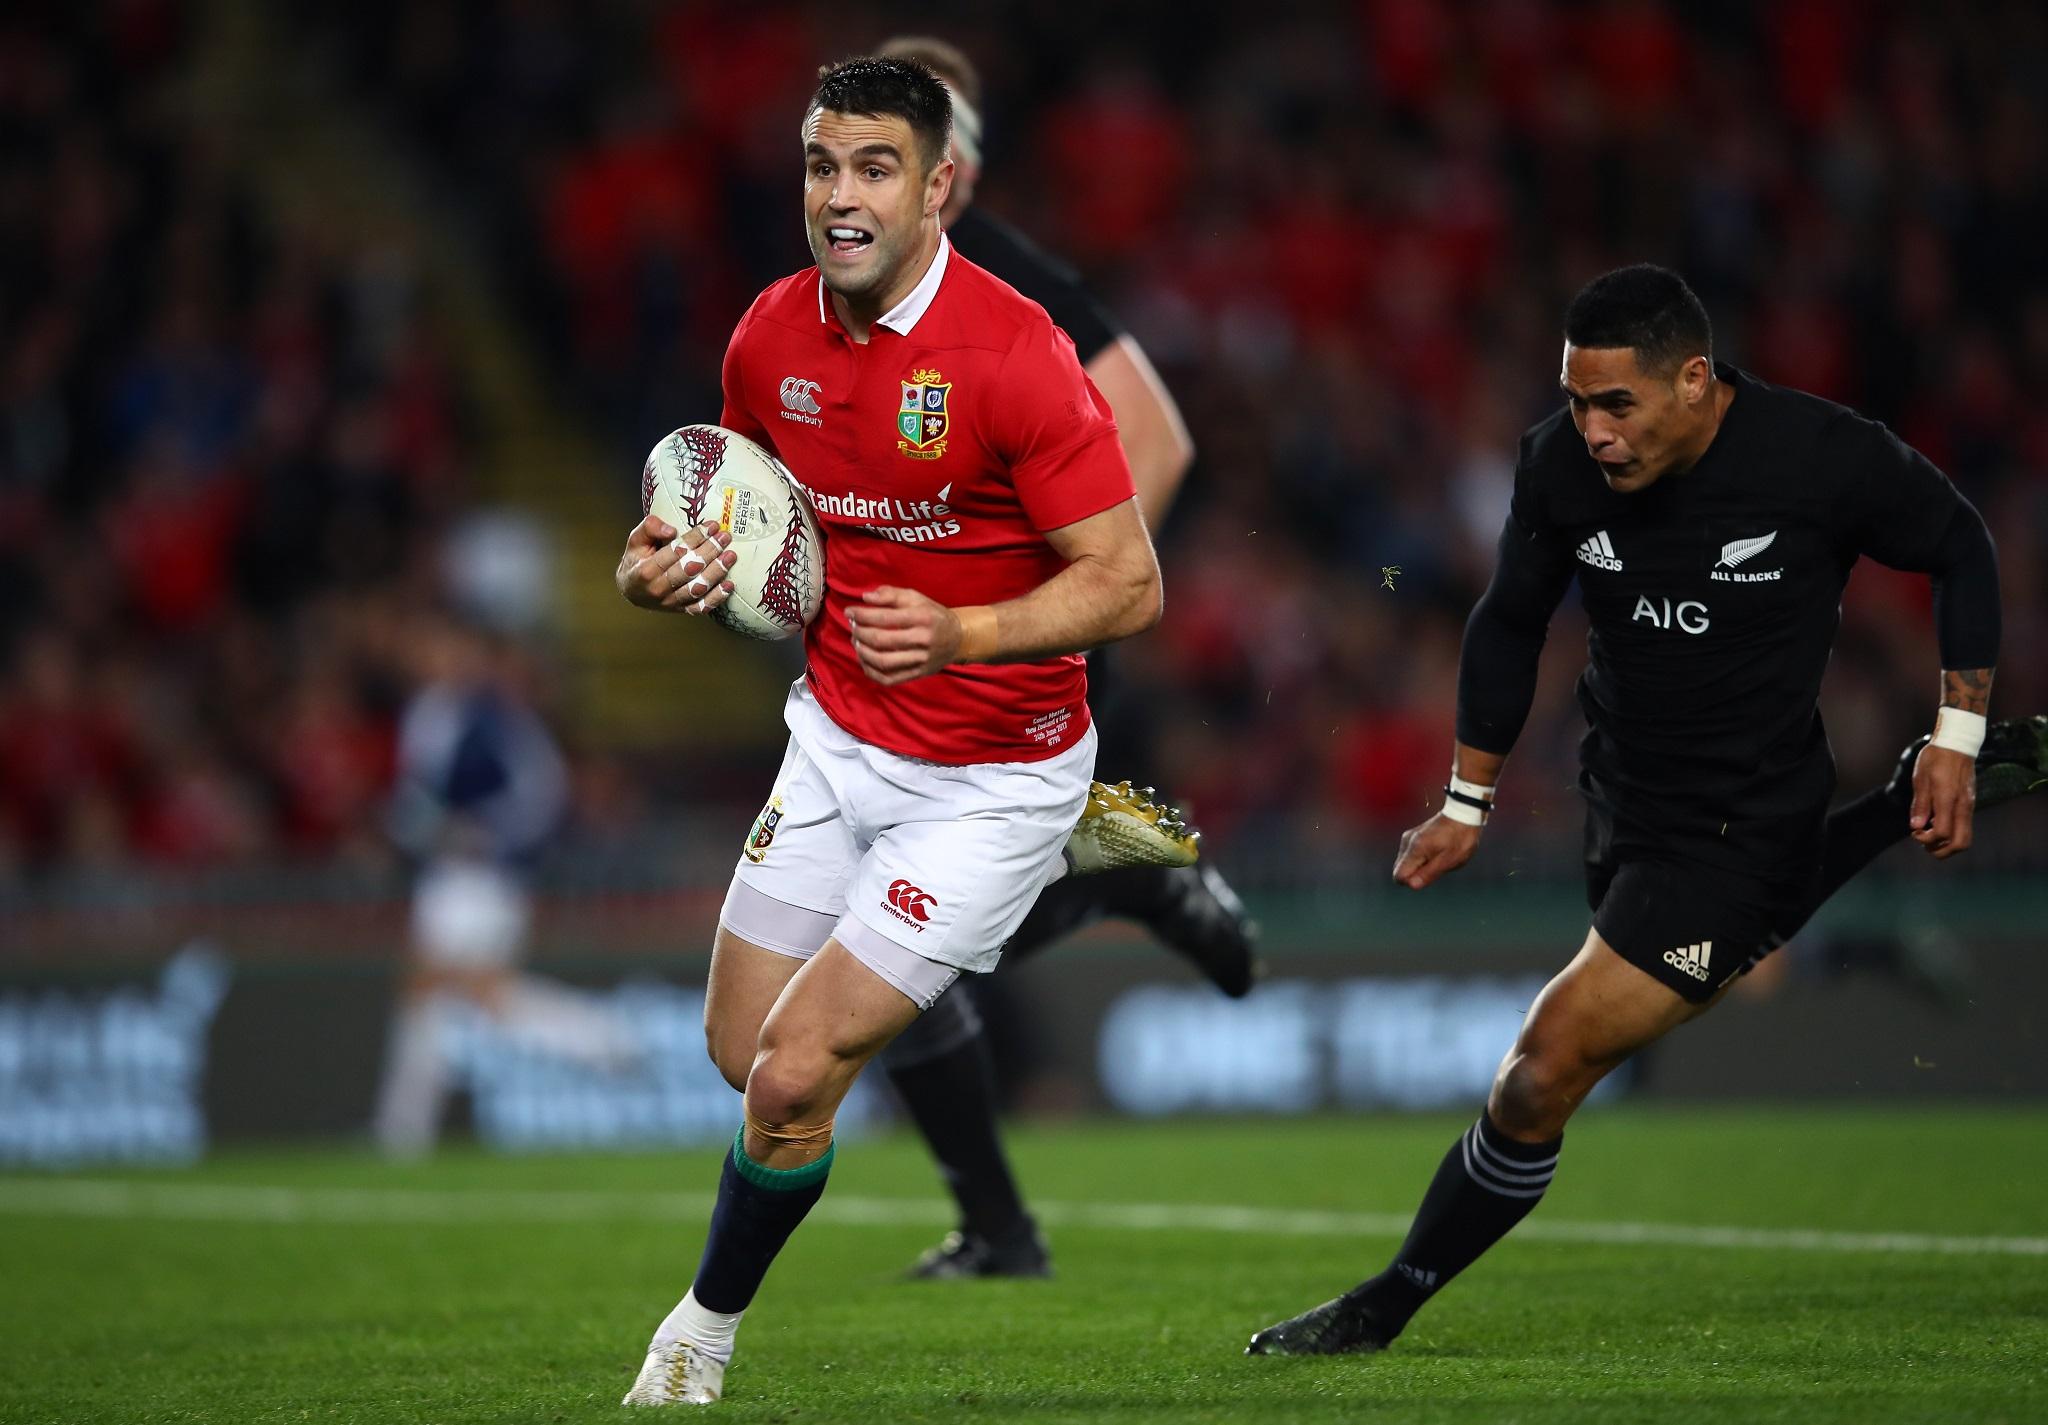 Warren Gatland believes the All Blacks intentionally targeted Lions scrum-half Conor Murray